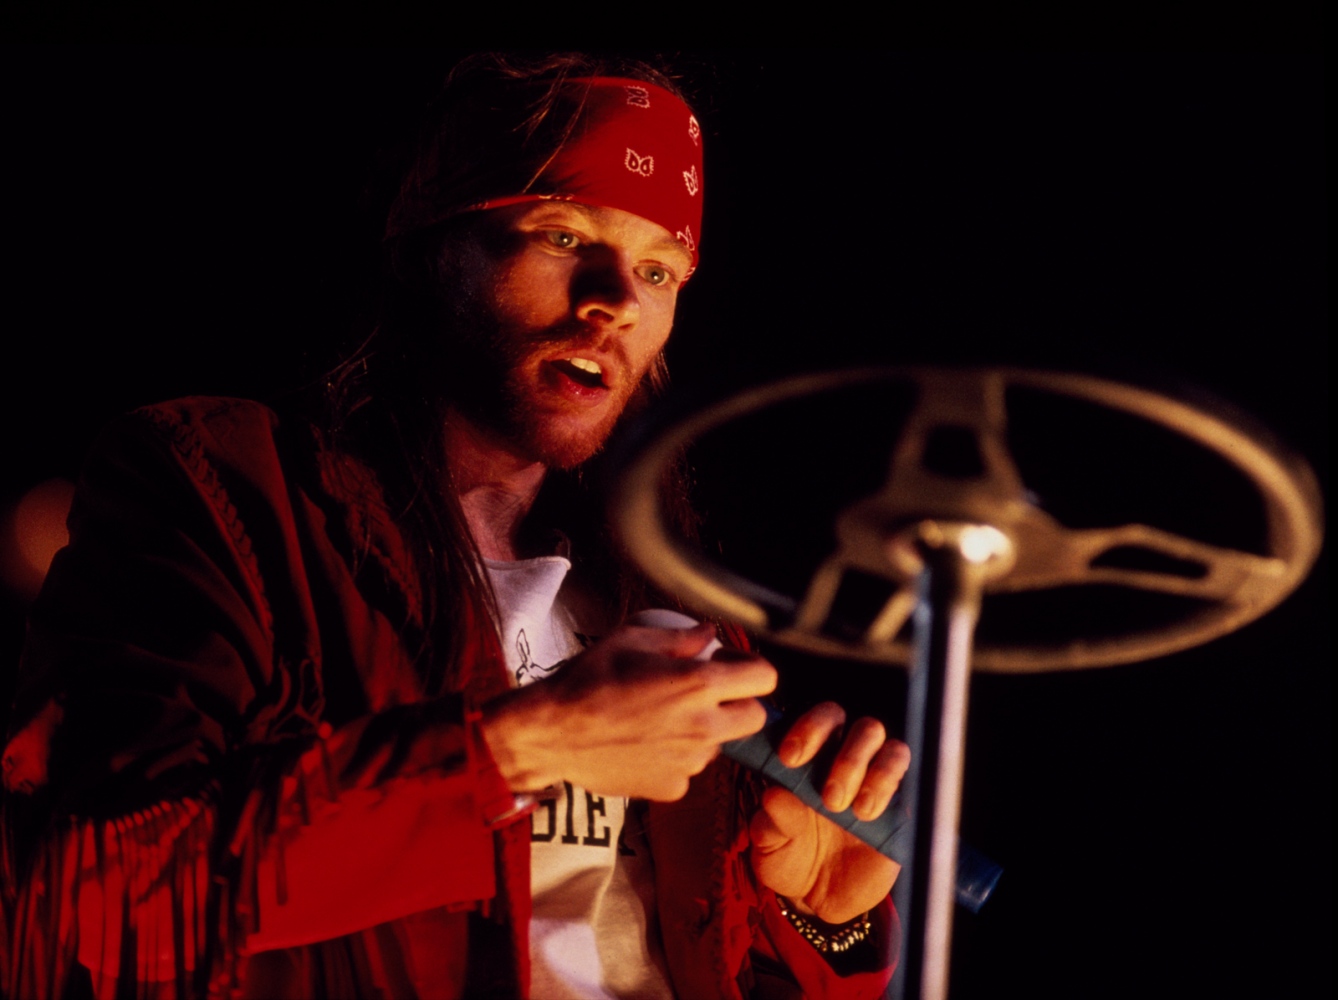 ROCK N ROLL FOR LIFE, NY TIMES MAGAZINE - Axl Rose of Guns n Roses on stage, 1991